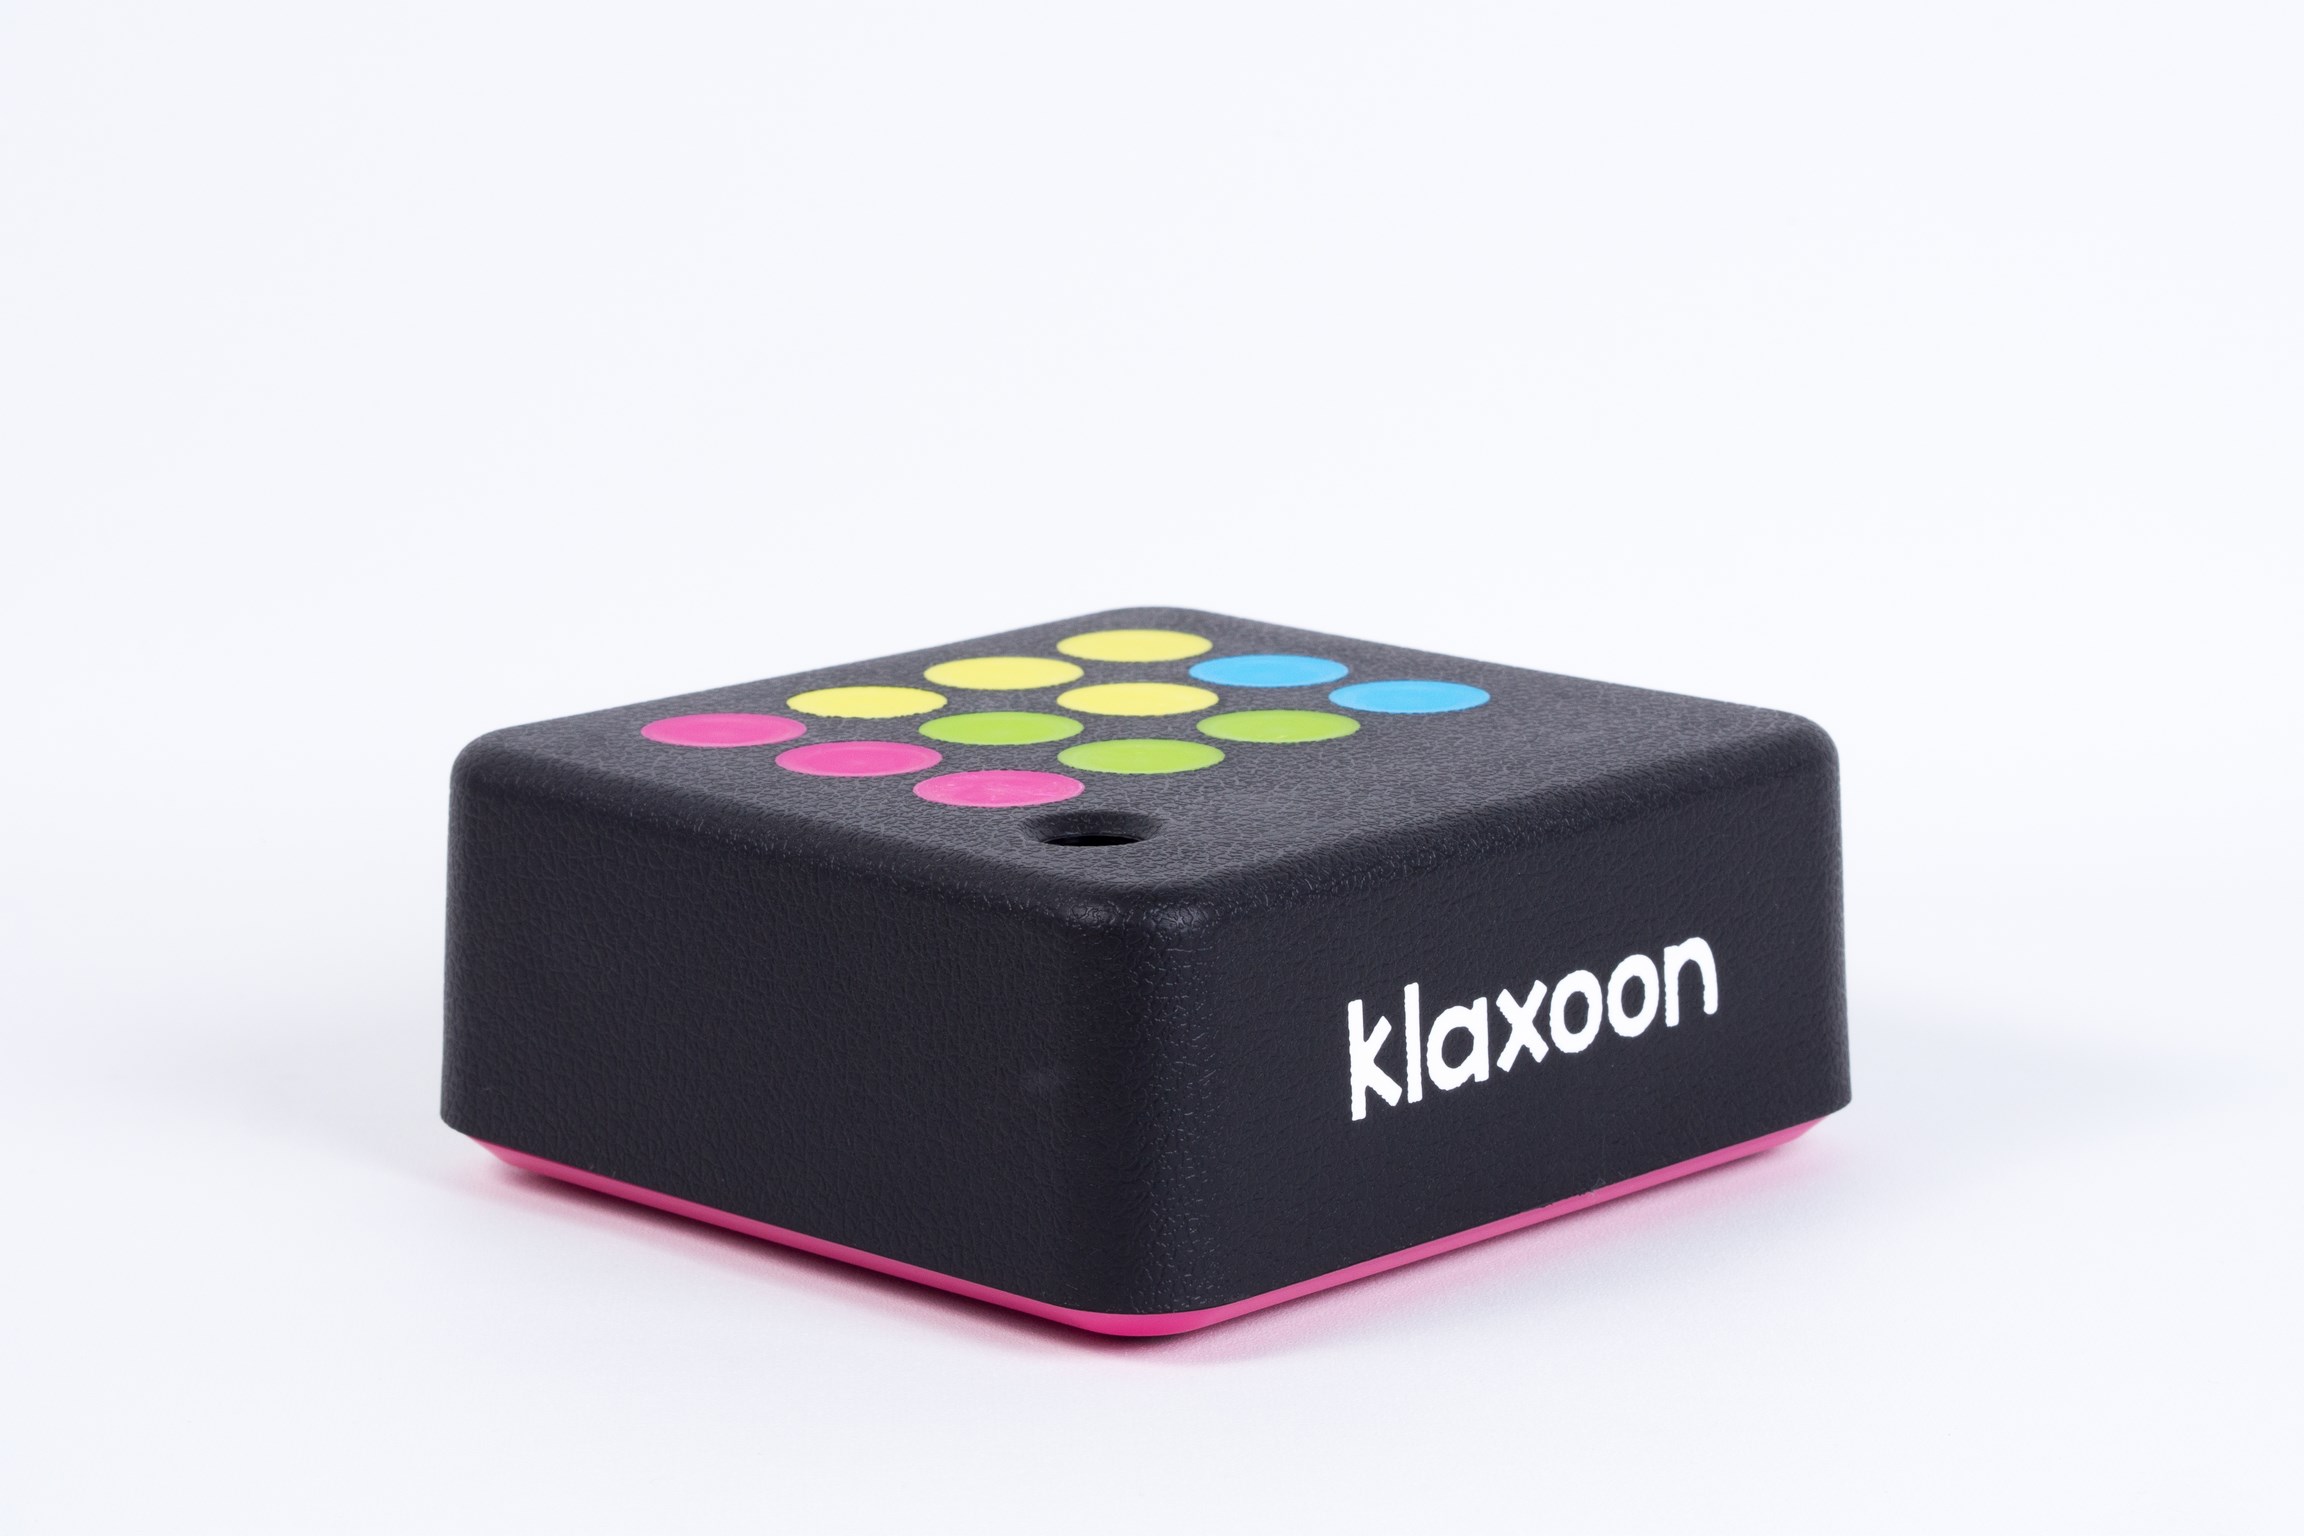 Klaxoon Box generates its own WiFi network allowing for full control of data and guaranteed privacy.